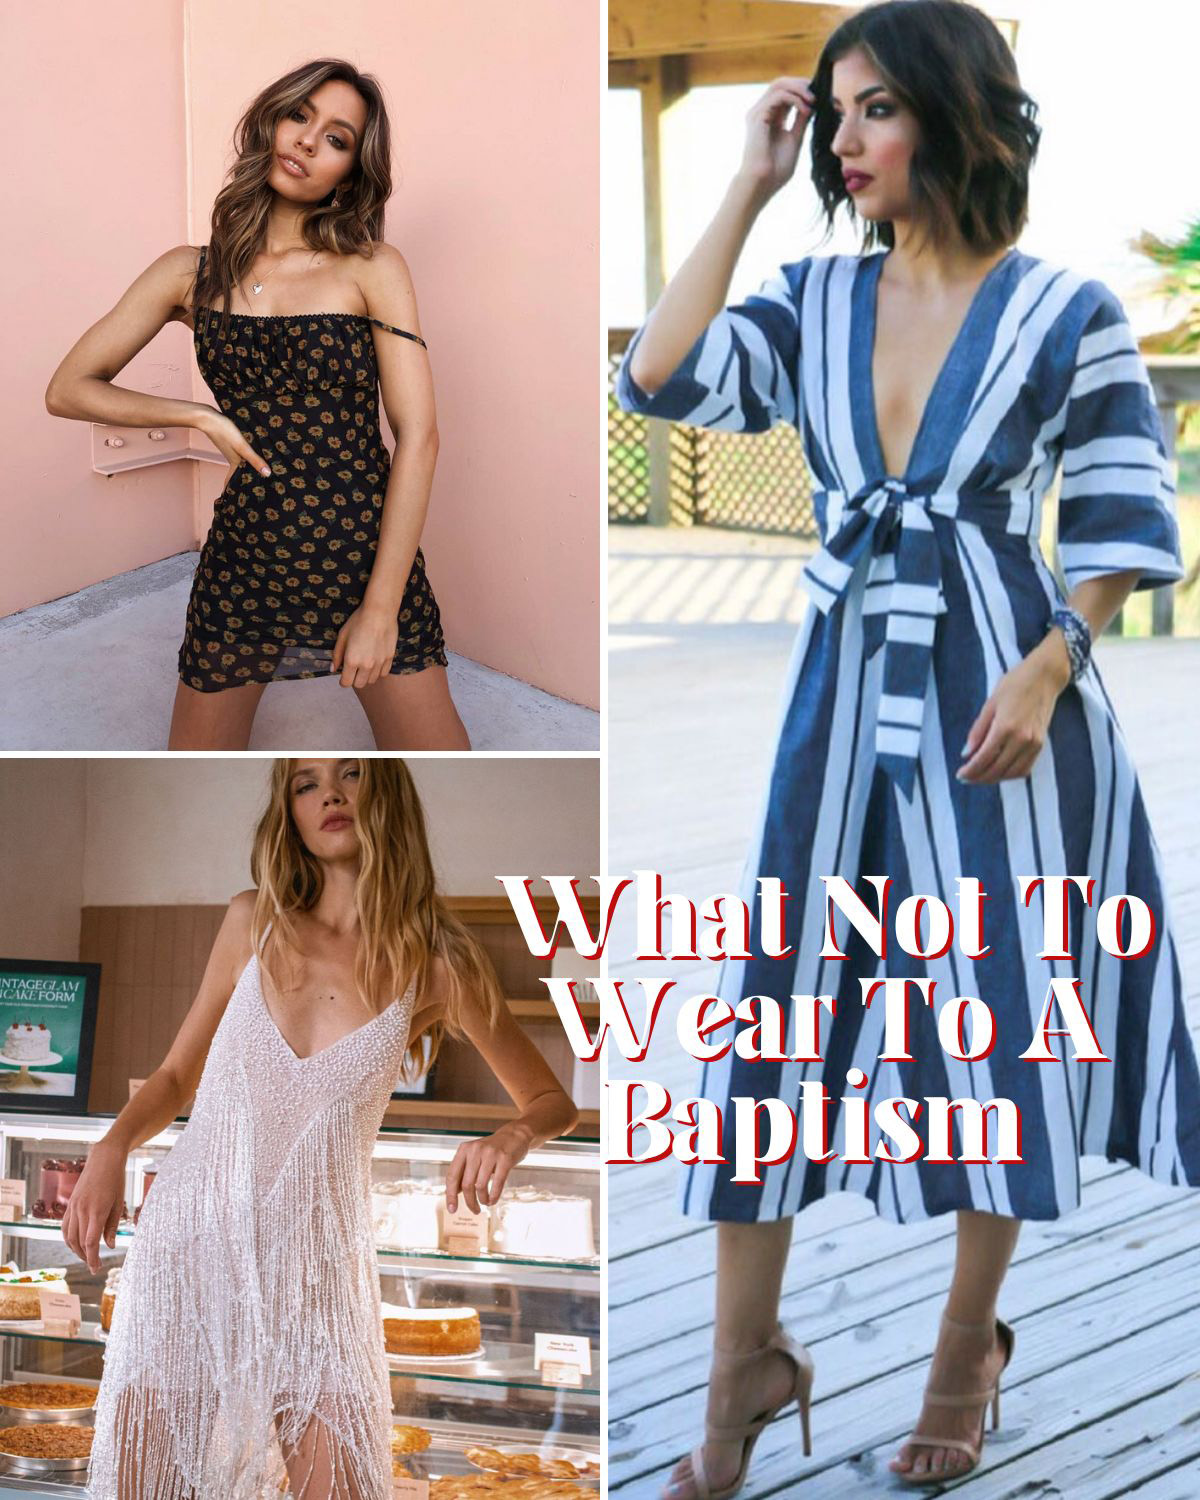 Three examples of what not to wear to a baby dedication